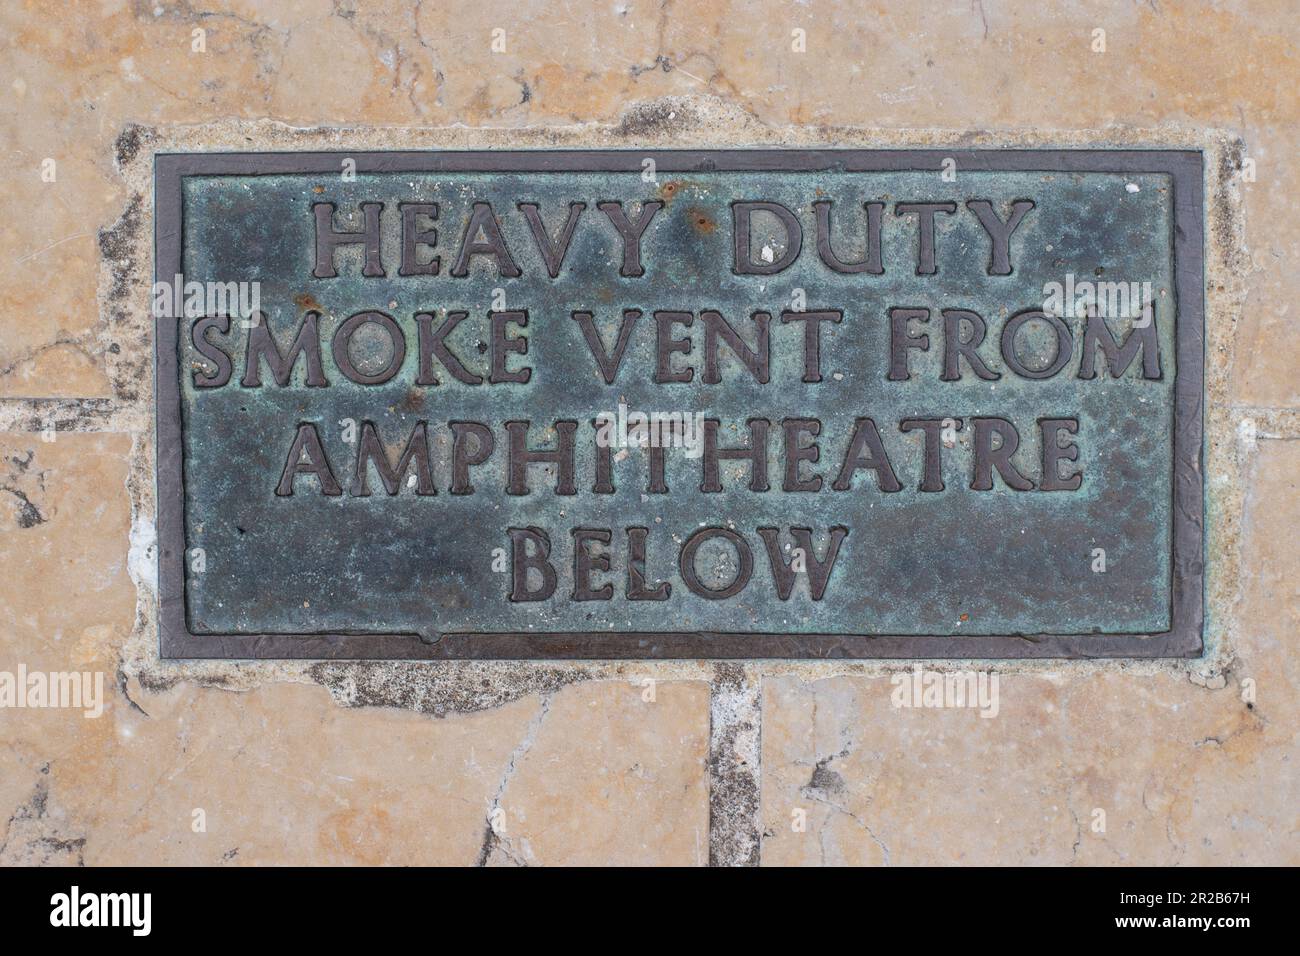 Heavy duty smoke vent from amphitheatre below bronze sign bronze plaque on pavement sidewalk footpath in City of London Stock Photo